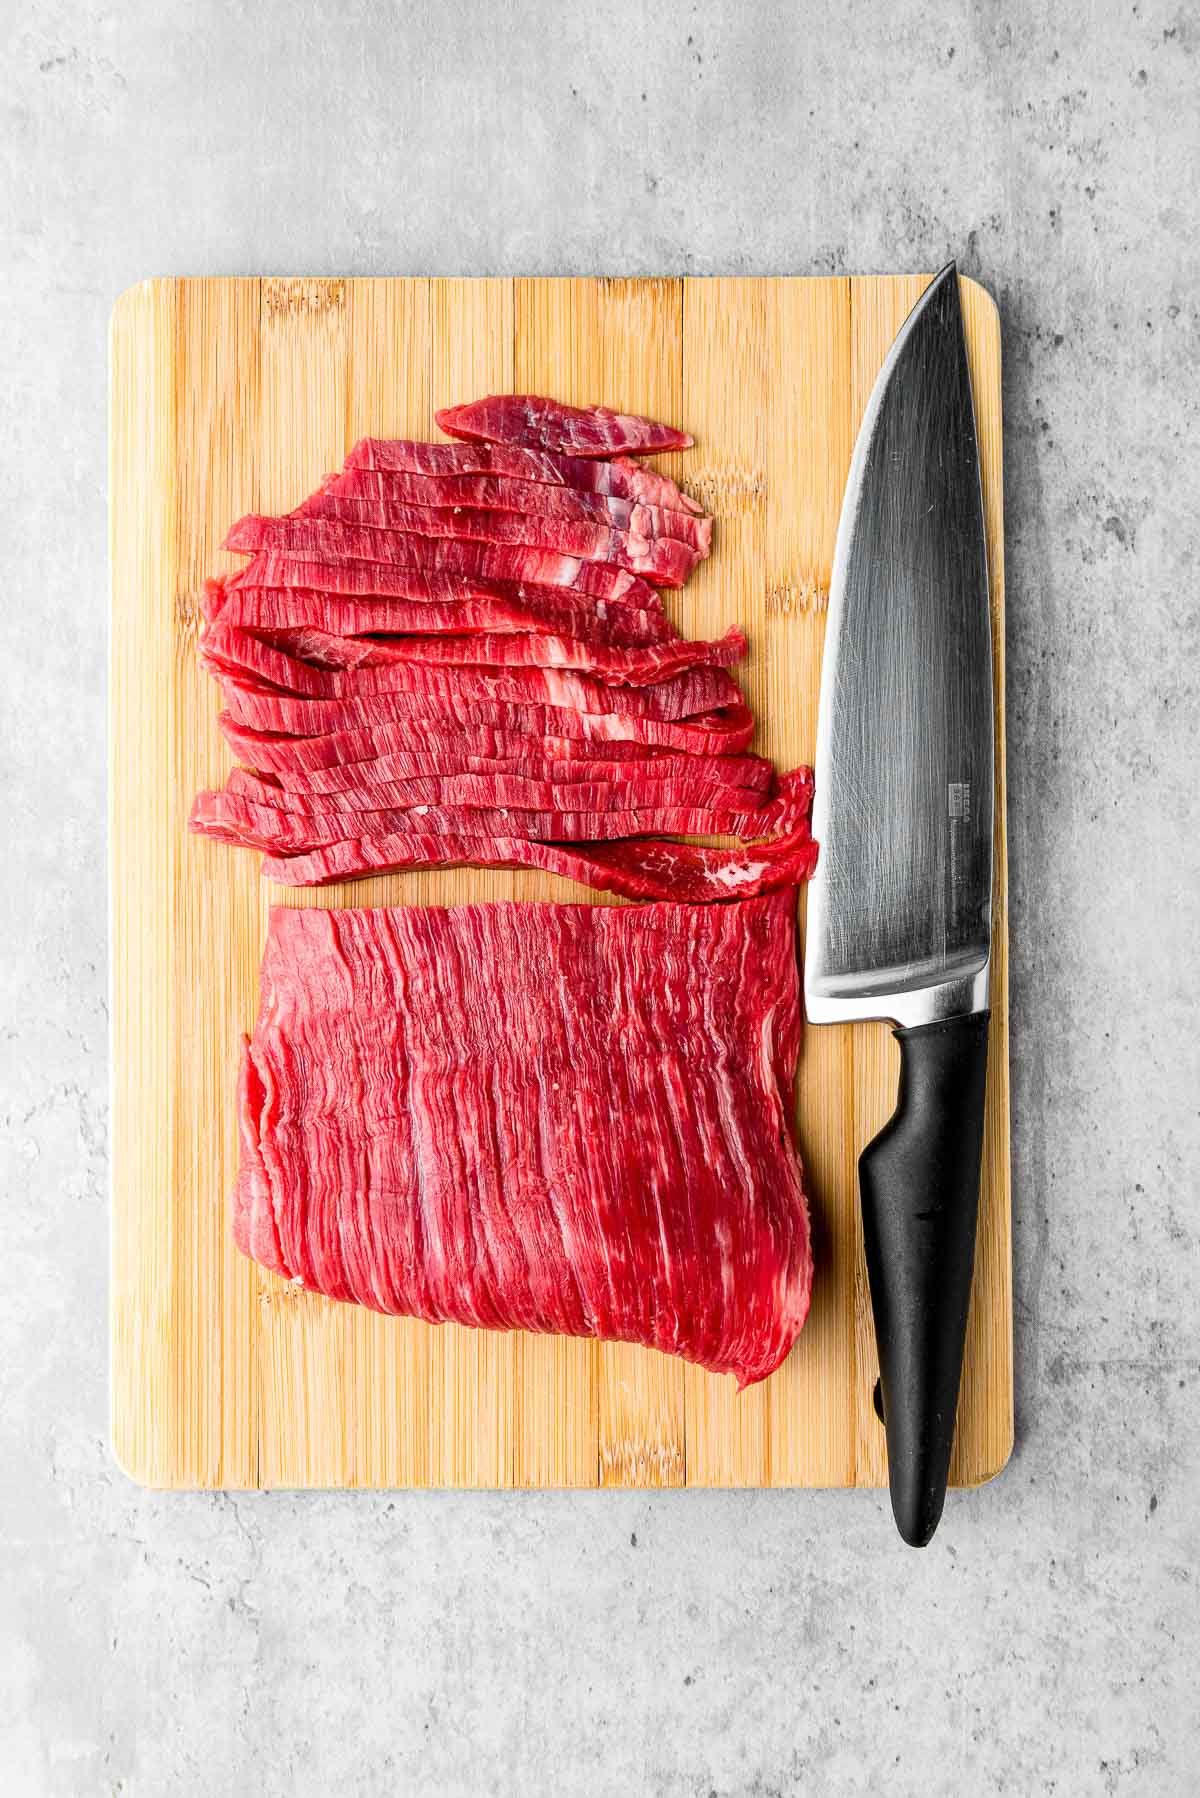 Sliced flank steak on top of a wooden cutting board with half an uncut steak and a large knife on the side.